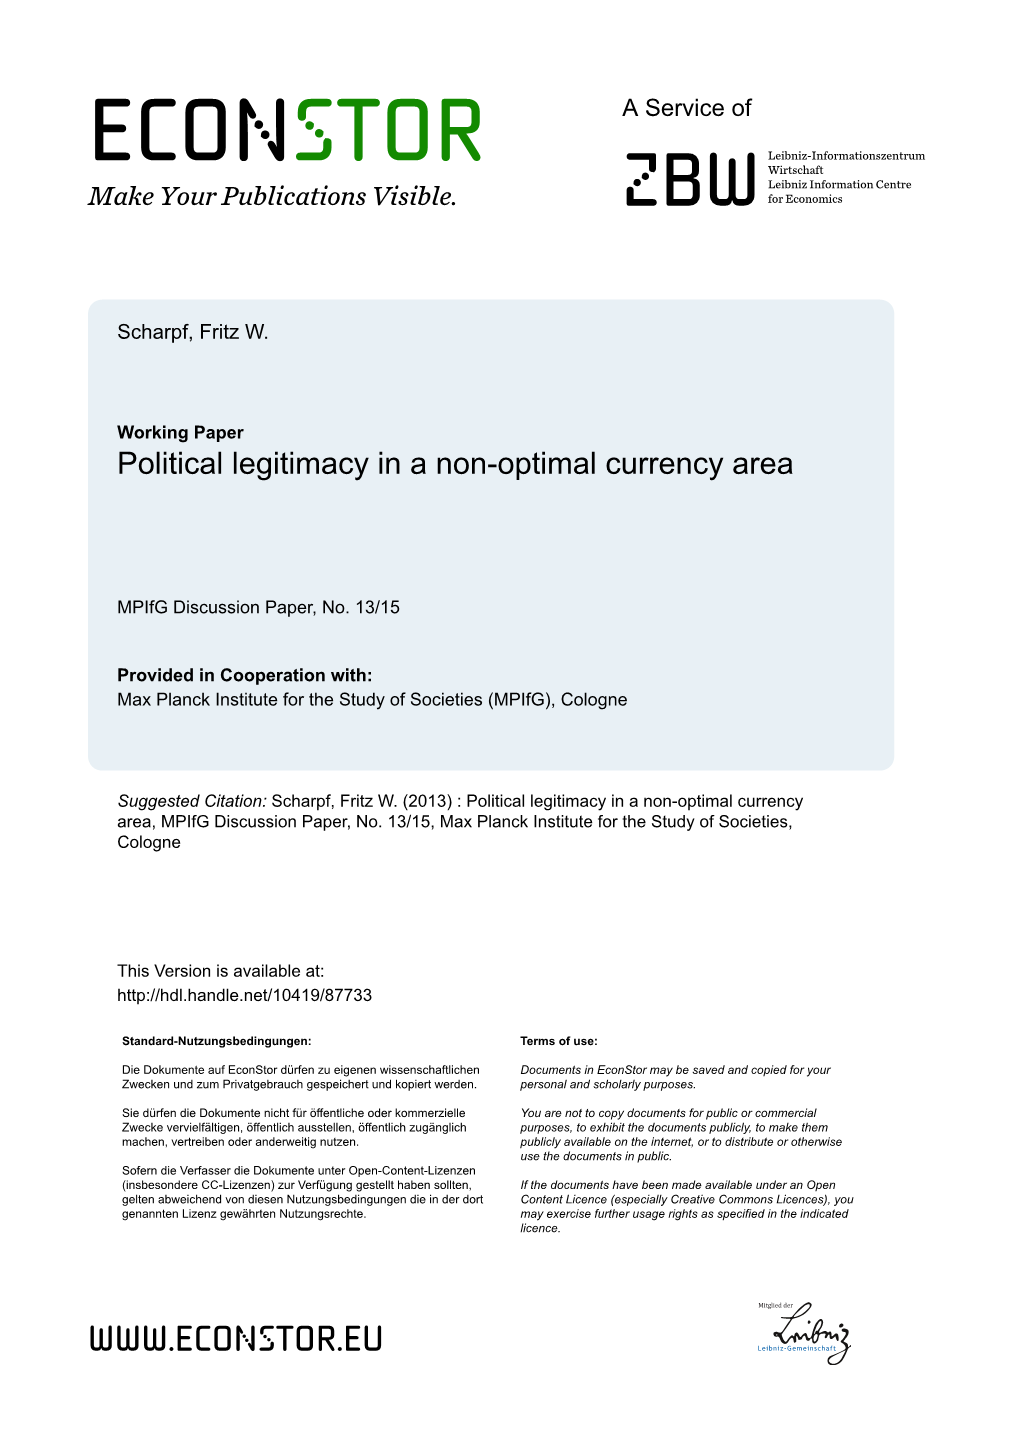 Political Legitimacy in a Non-Optimal Currency Area